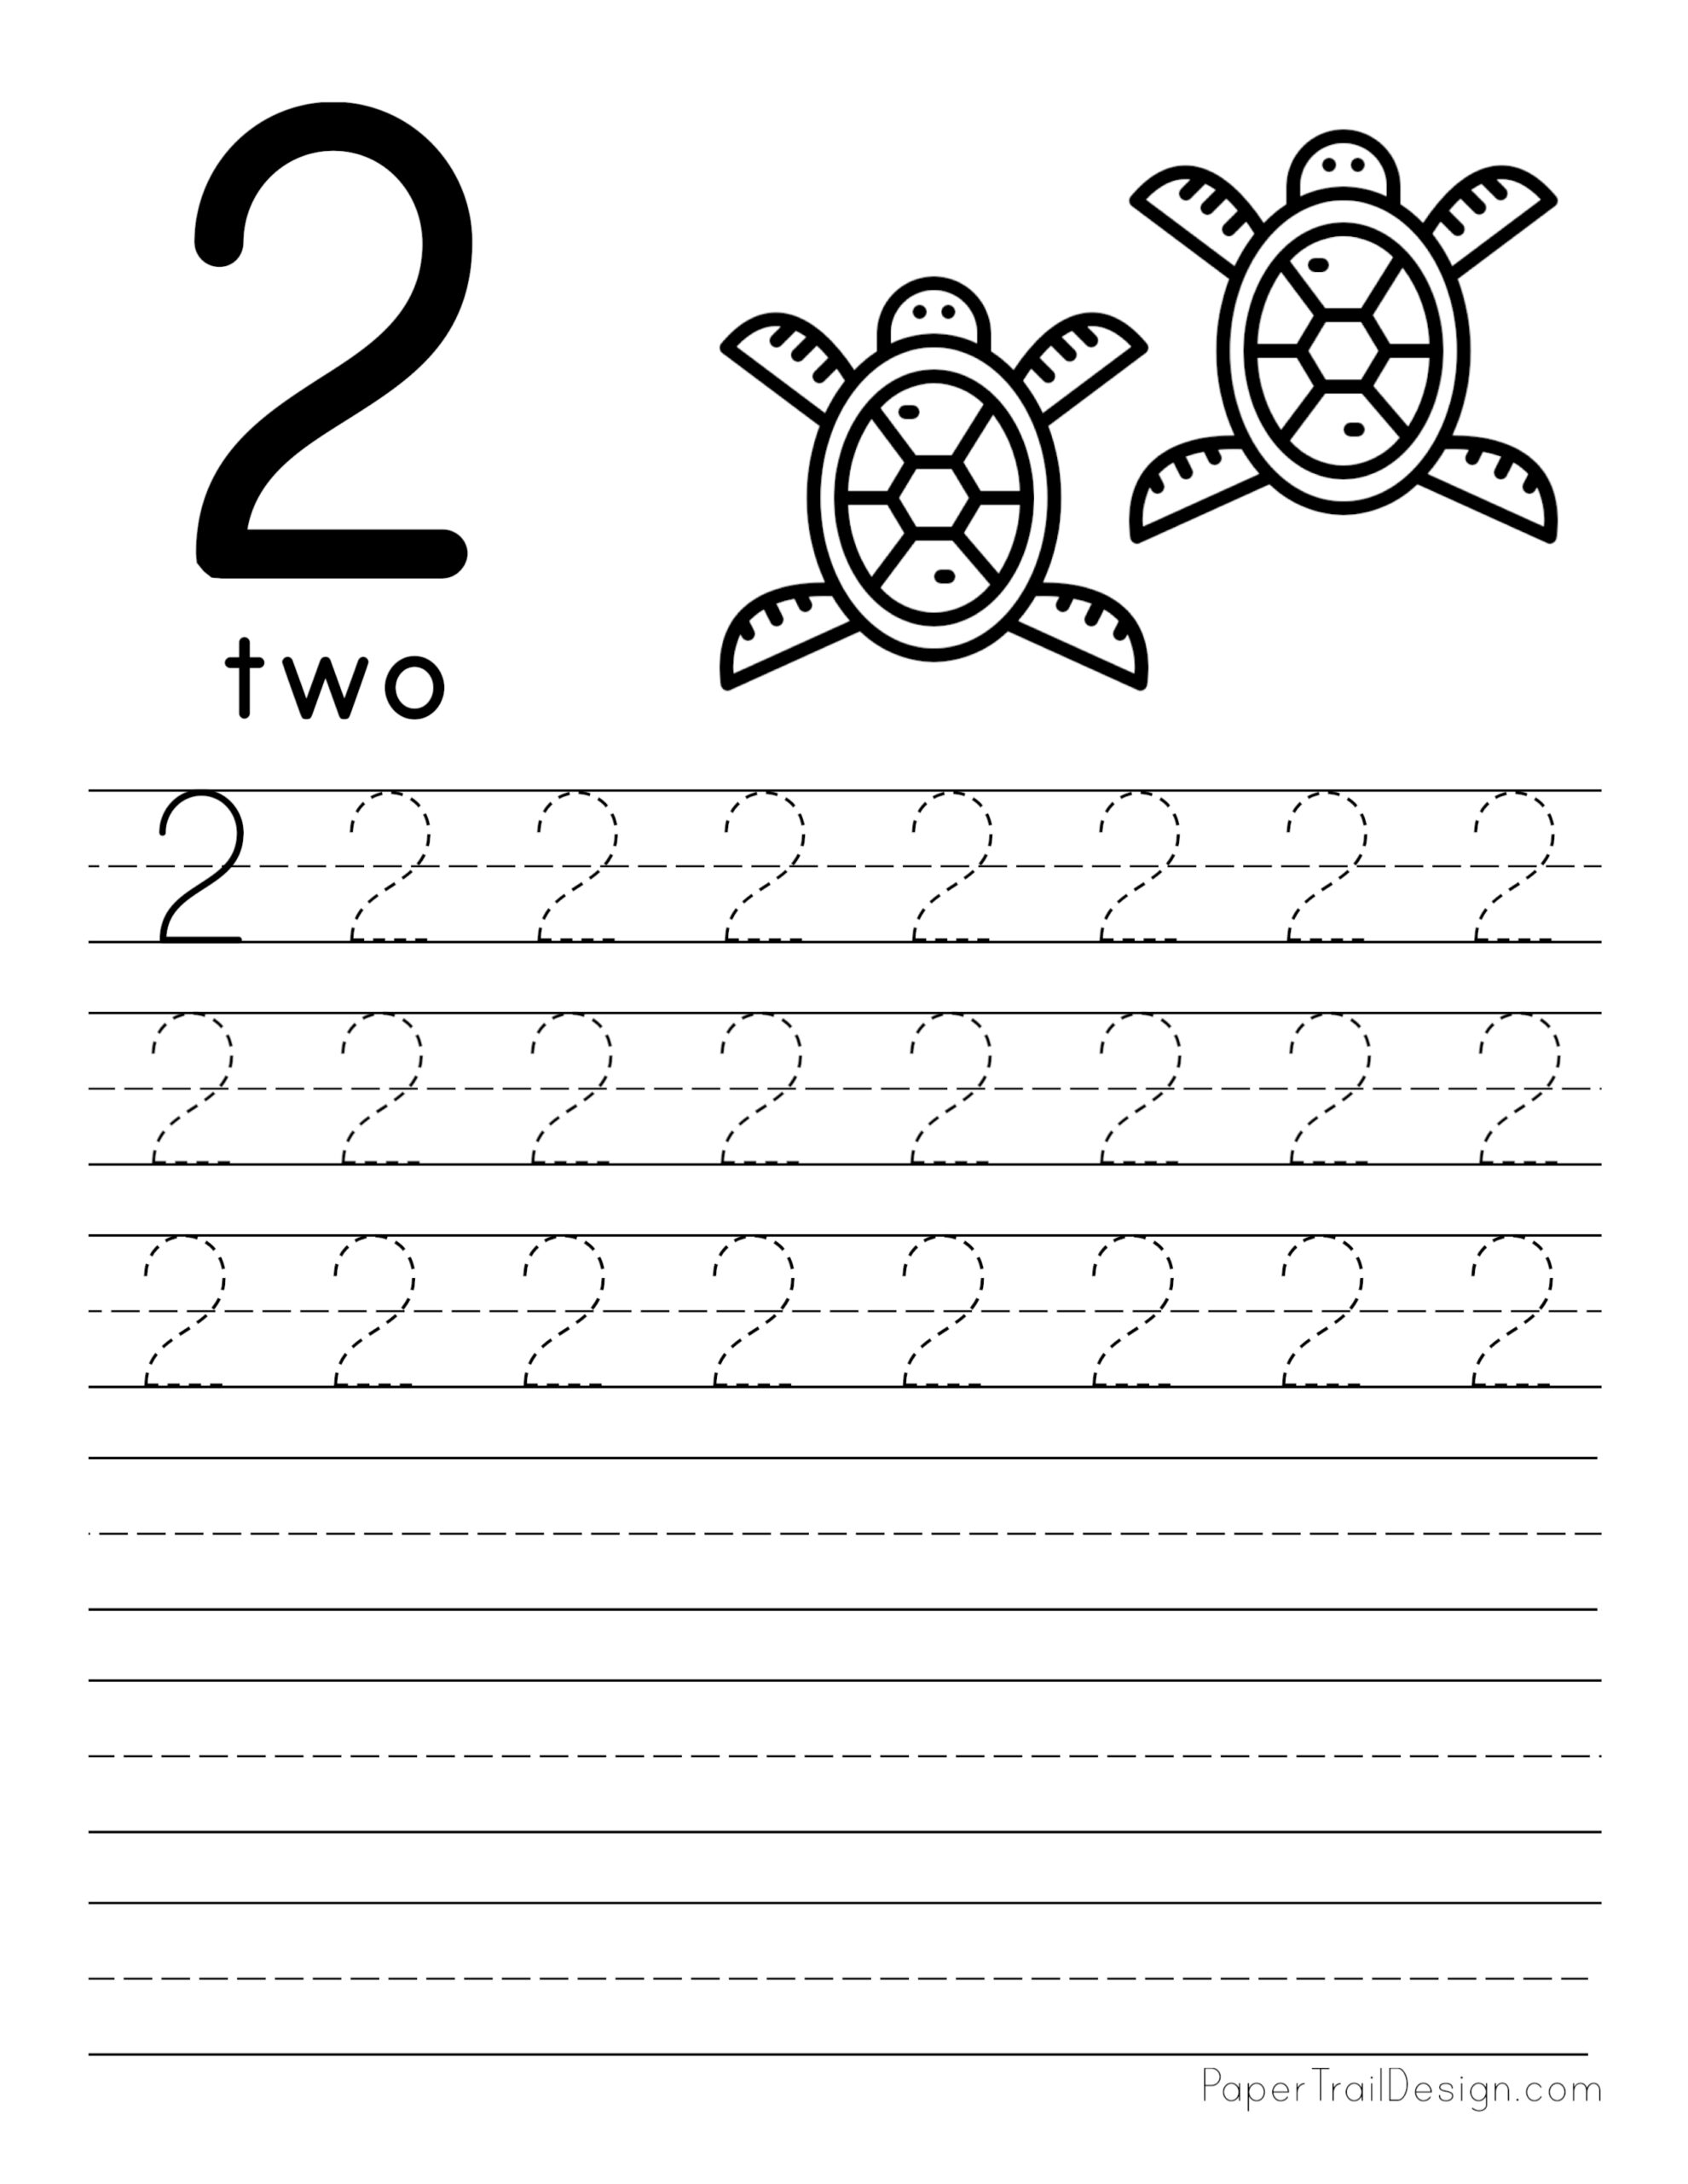 number-2-tracing-worksheets-f7b